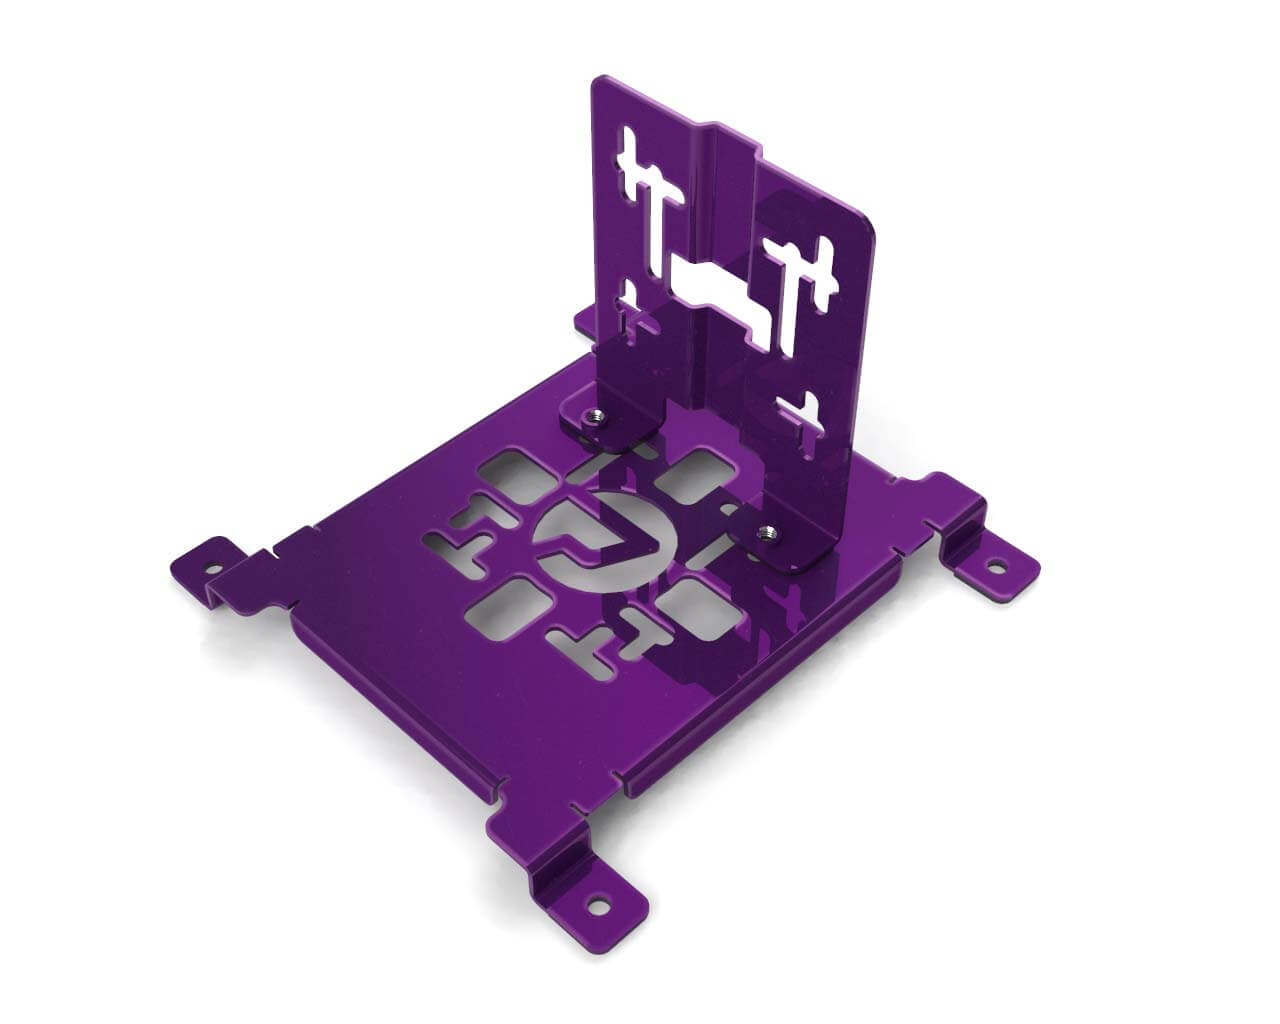 PrimoChill SX Universal Spider Mount Bracket Kit - 140mm Series - PrimoChill - KEEPING IT COOL Candy Purple